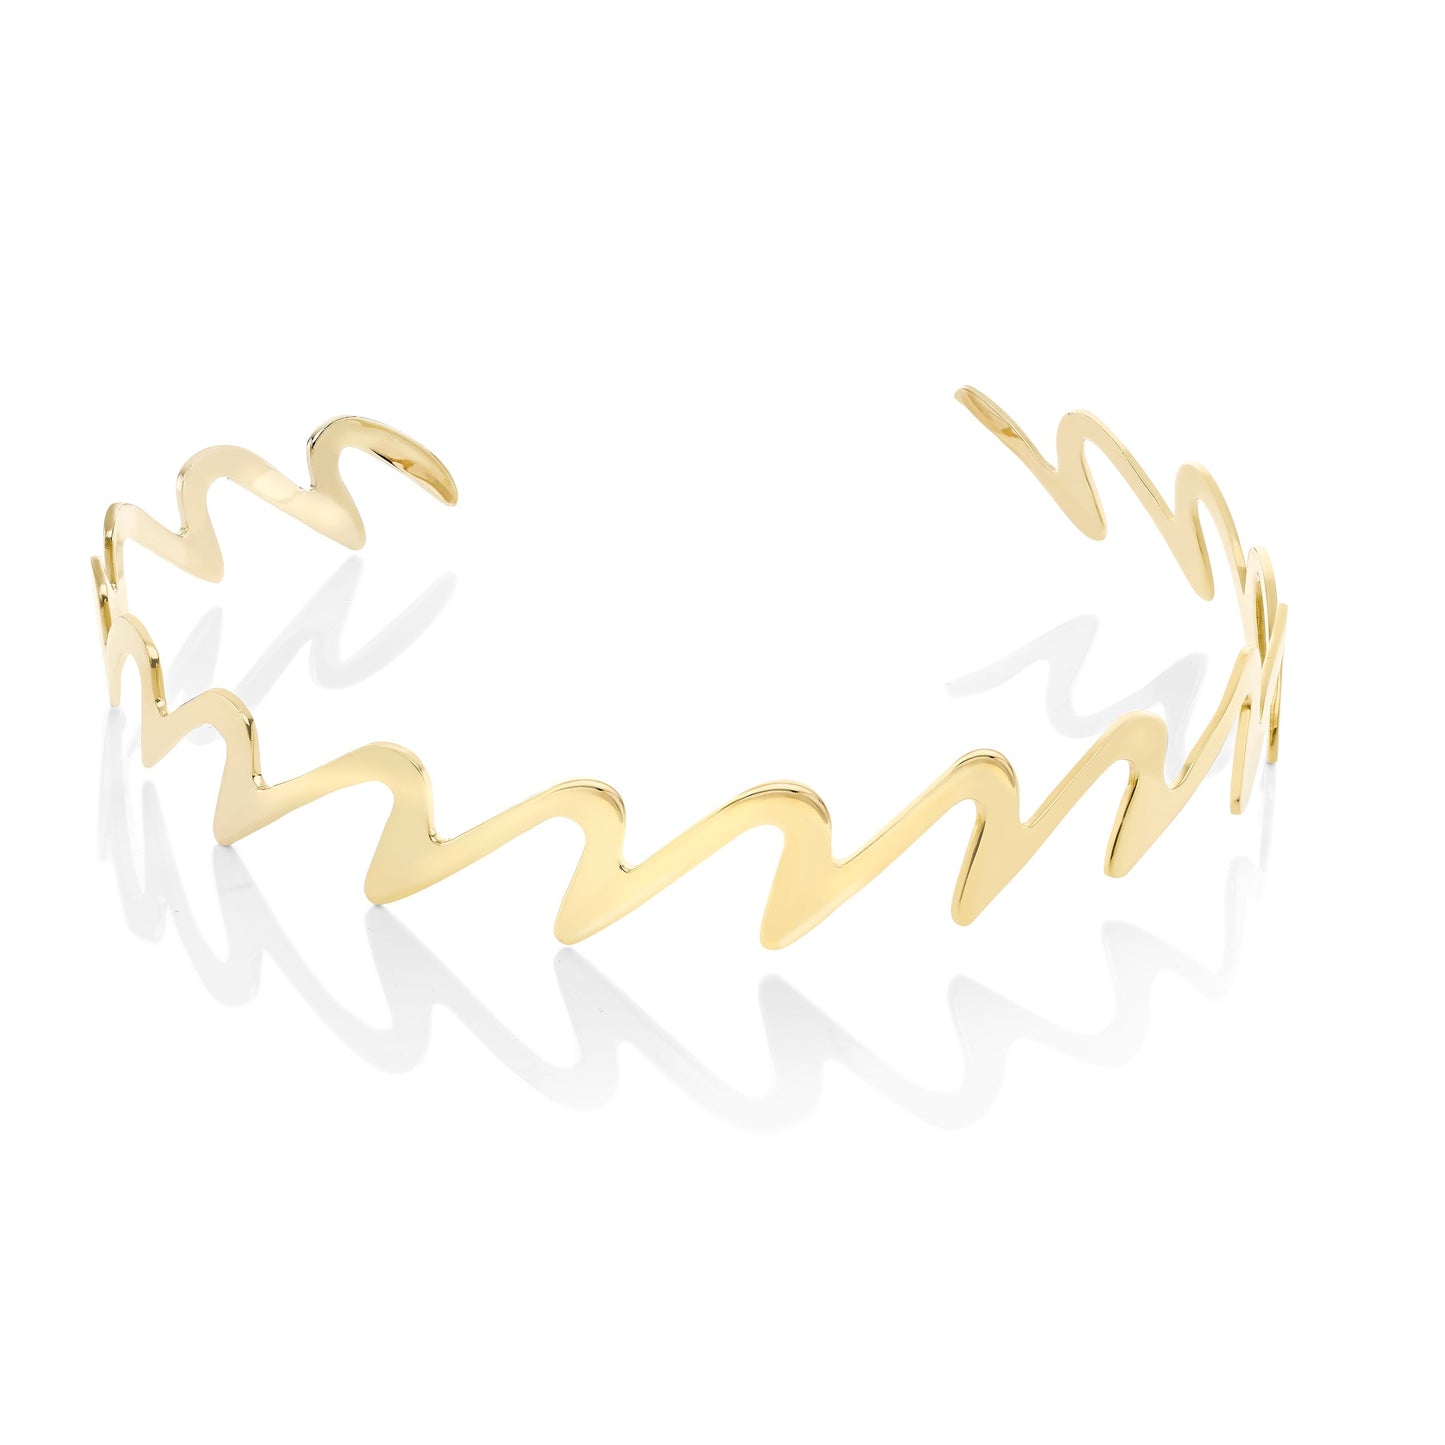 British Luxury jewellery piece, 18ct Yellow Gold plated Sterling Silver Wedeln Torc – Gstaad Collection, Augustine Jewellery, Luxury Jewellery London.